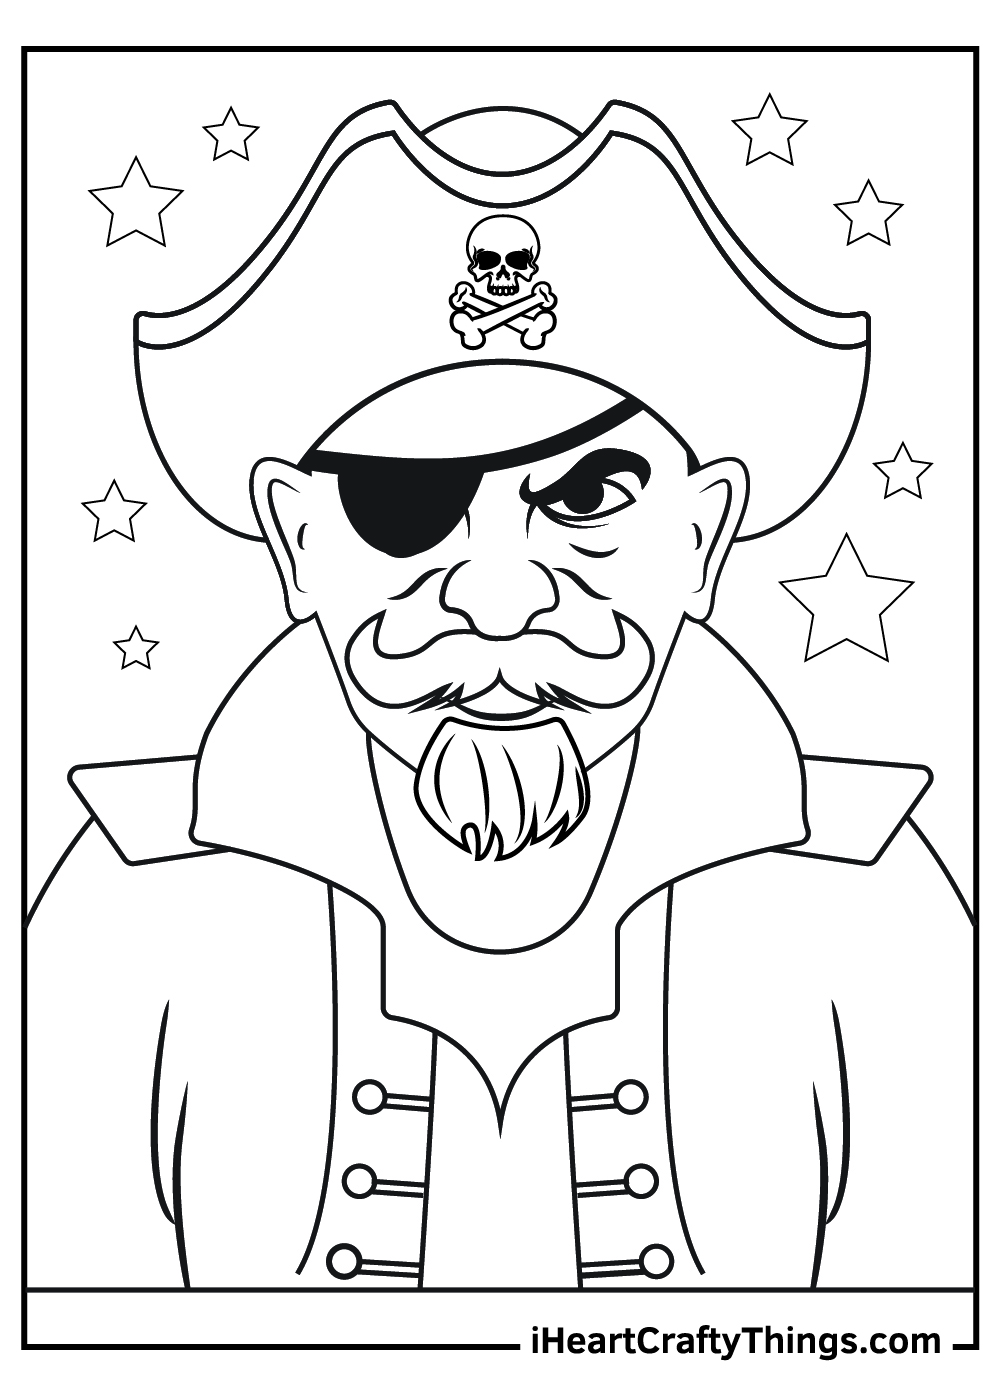 Pirates coloring pages free printables